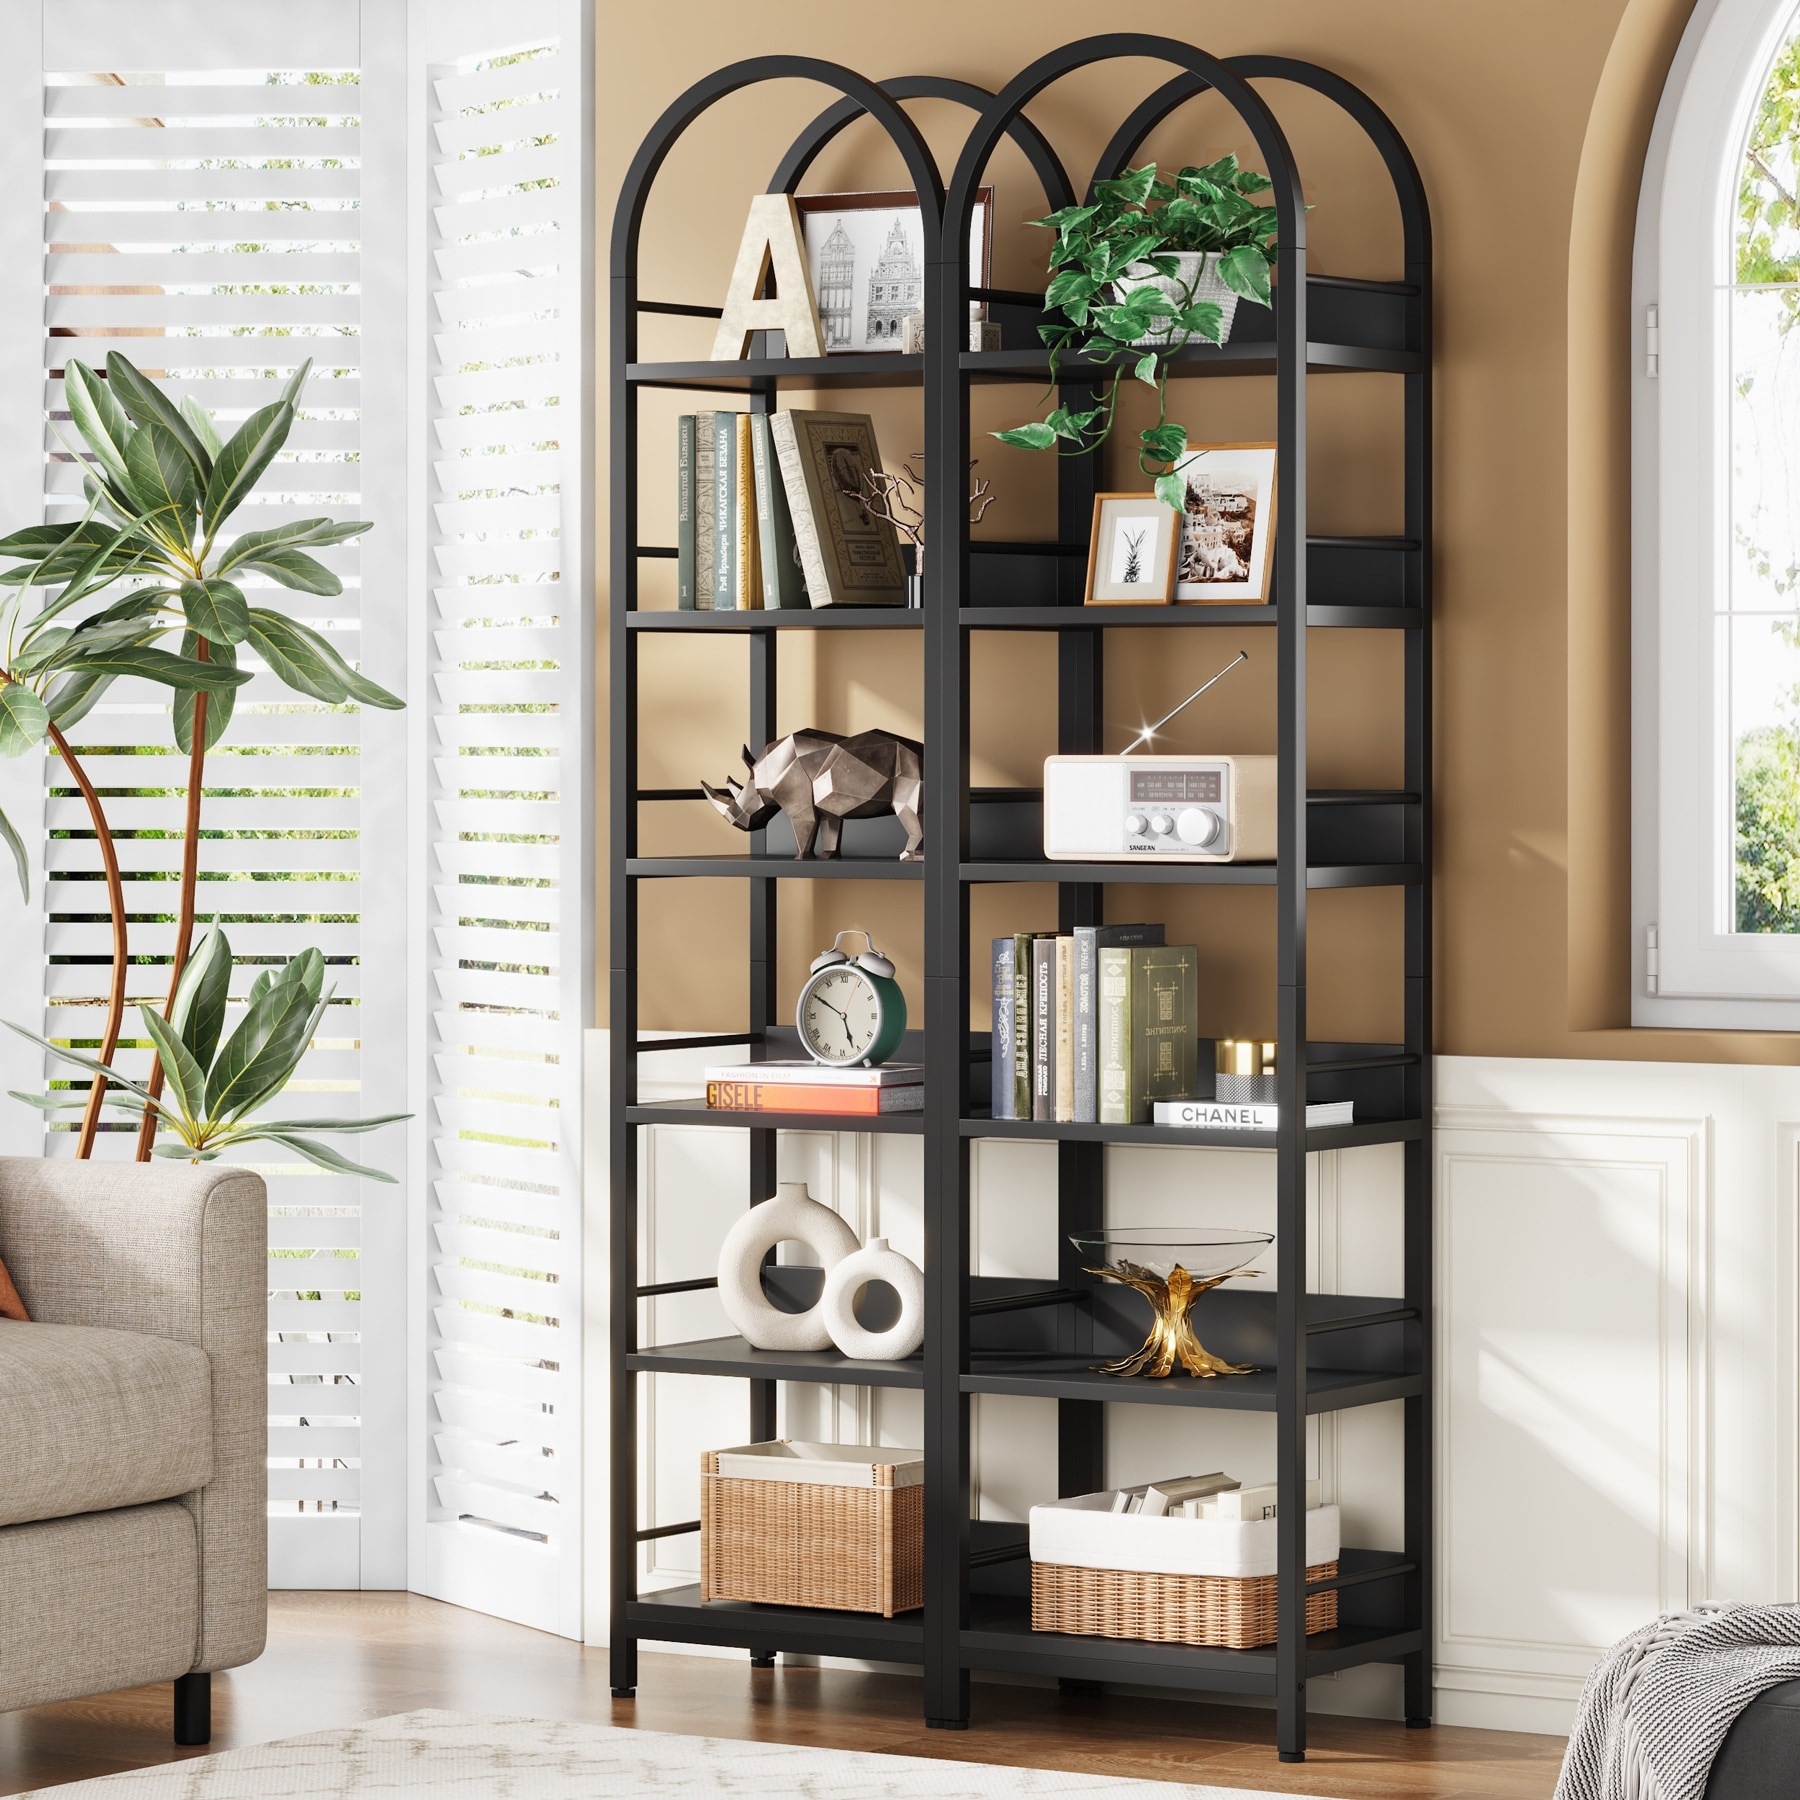 https://ak1.ostkcdn.com/images/products/is/images/direct/a4355da20cba286805a9a9d09c9369bc315b4d64/6-Tier-Open-Bookshelf%2C-78.7%22-Tall-Arched-Display-Shelf-Rack%2C-Brown.jpg